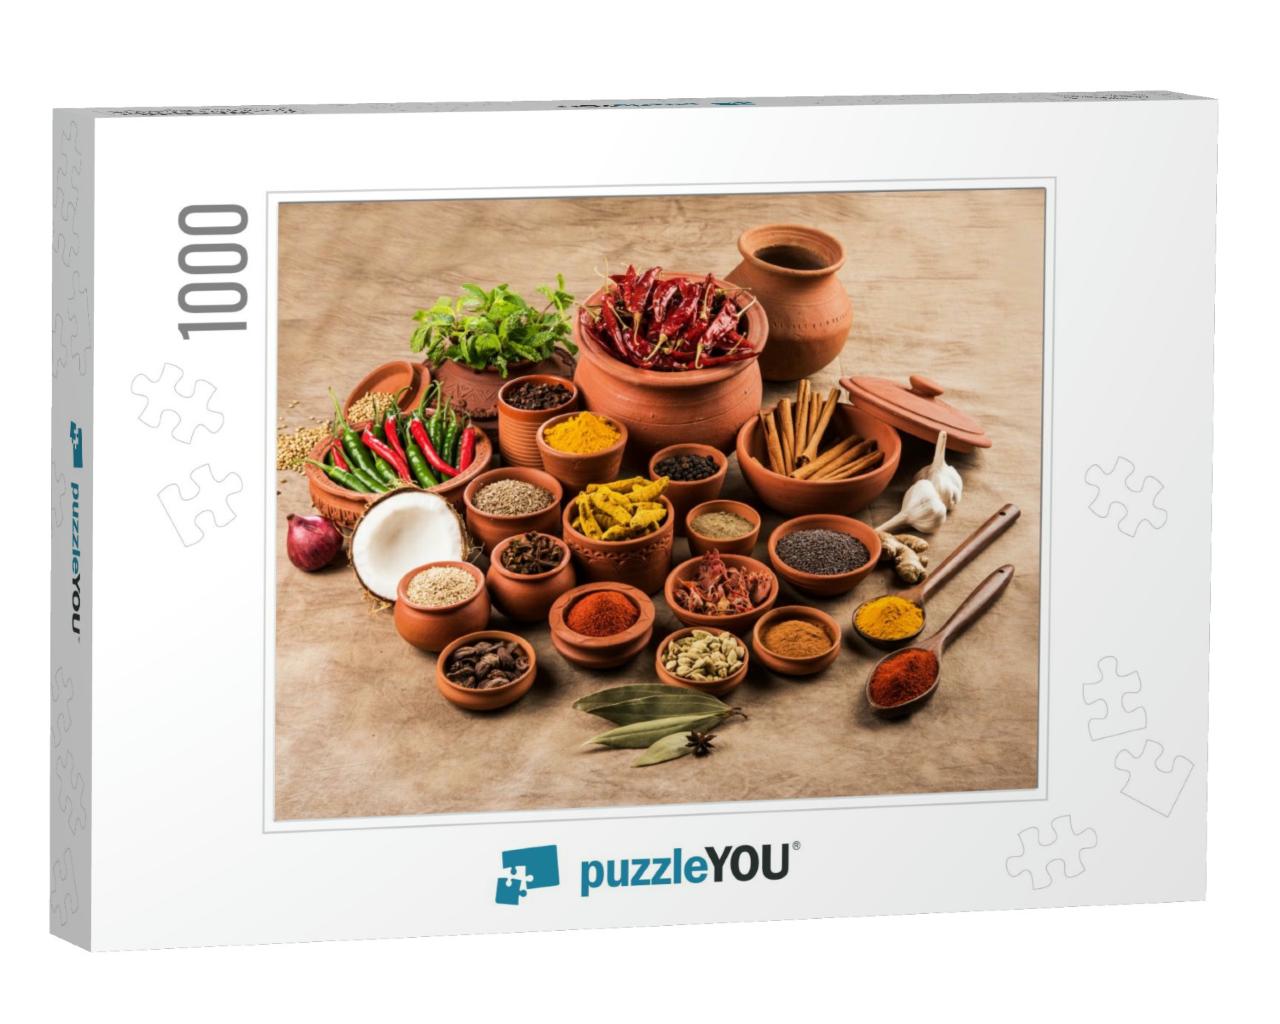 Indian Essential Spices in Terracotta Pots Arranged Over... Jigsaw Puzzle with 1000 pieces